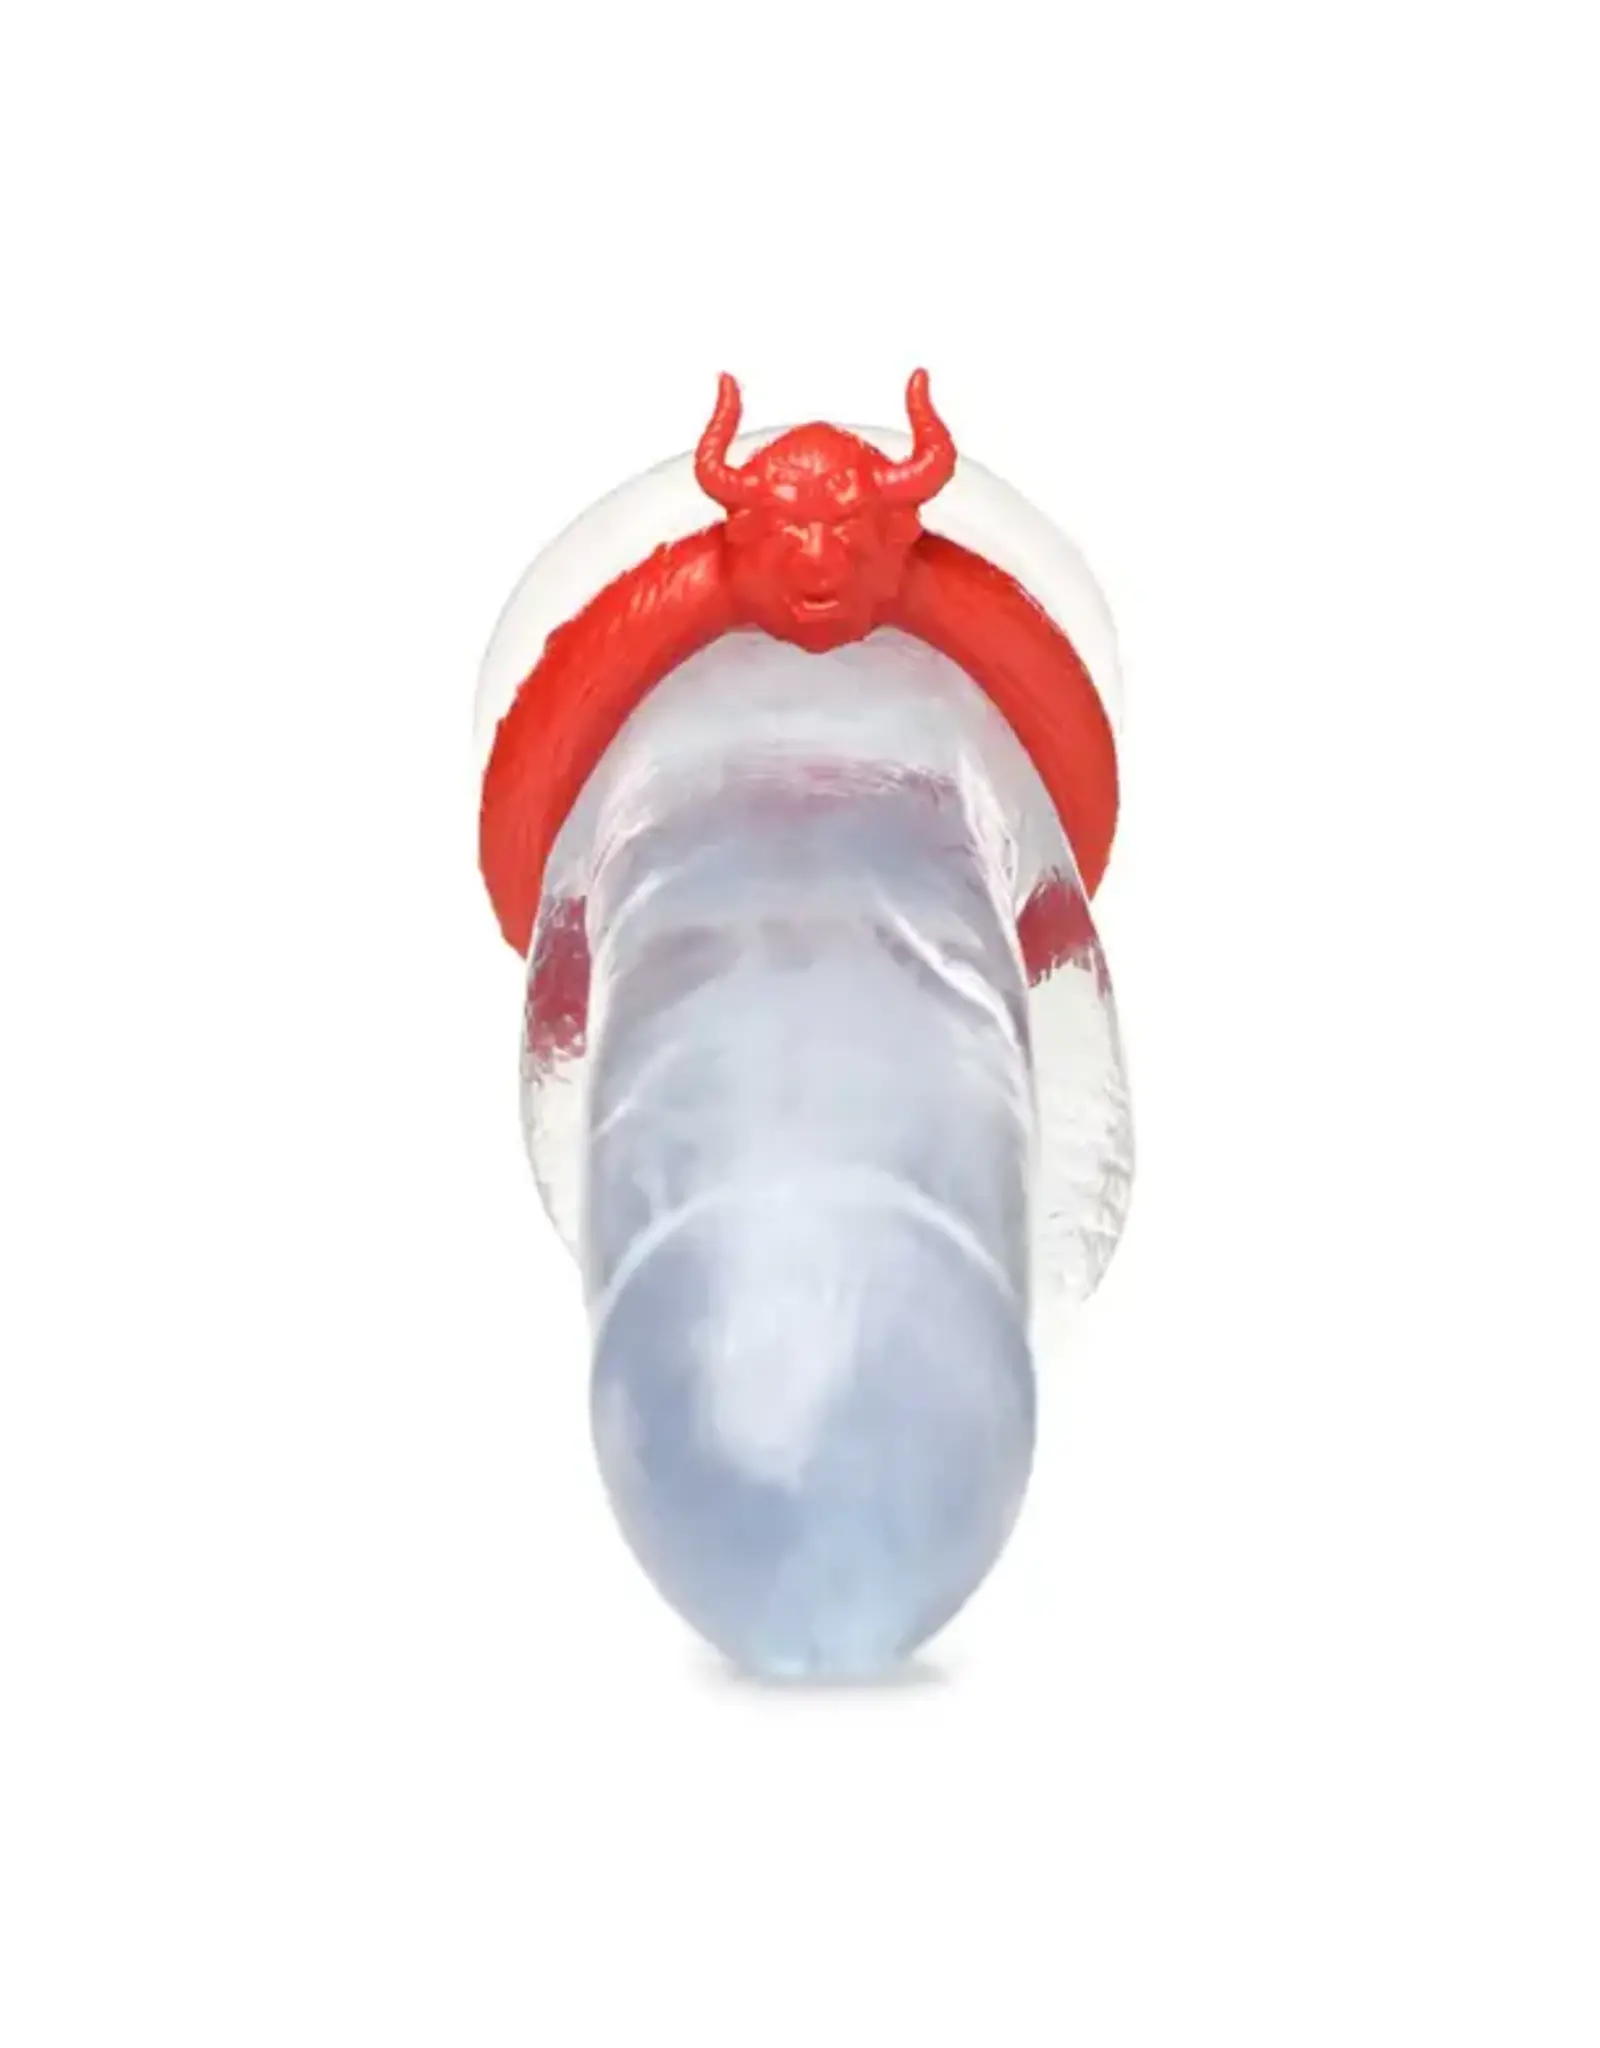 XR Brands Creature Cocks - Beast Mode - Silicone Cock Ring